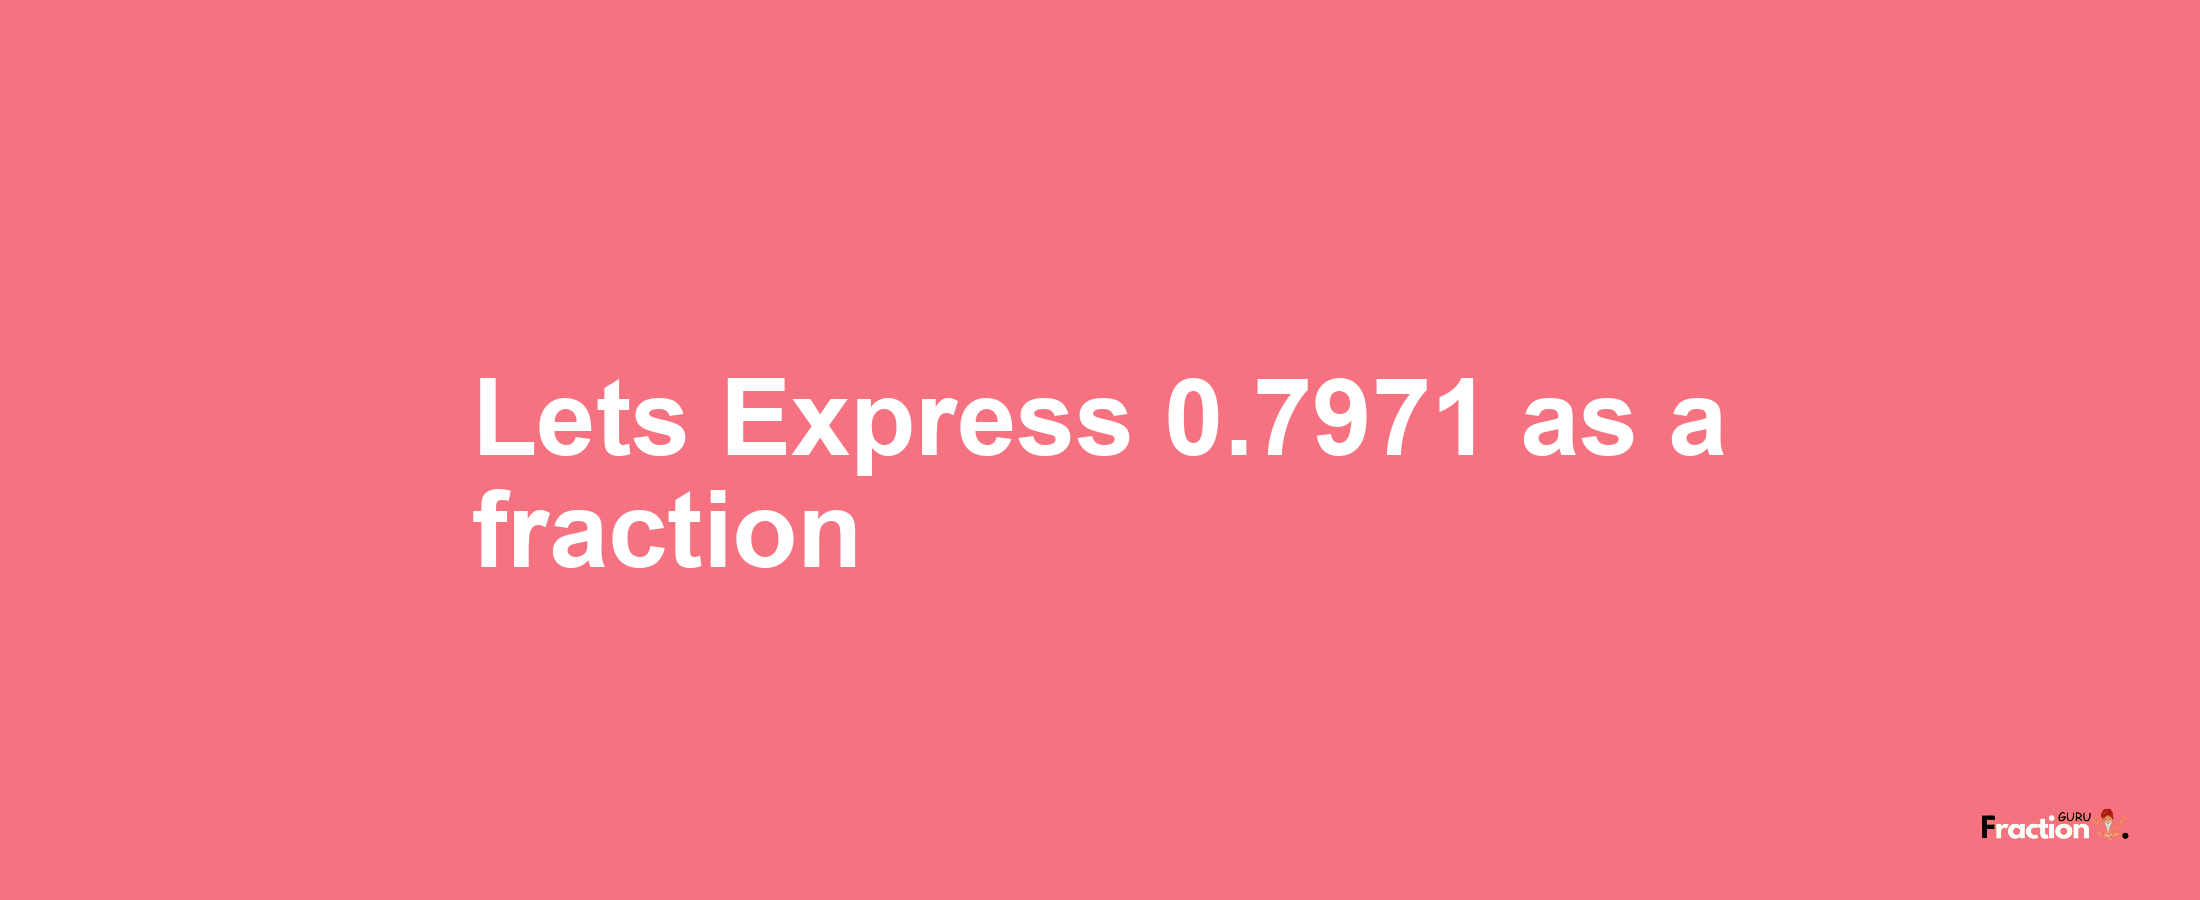 Lets Express 0.7971 as afraction